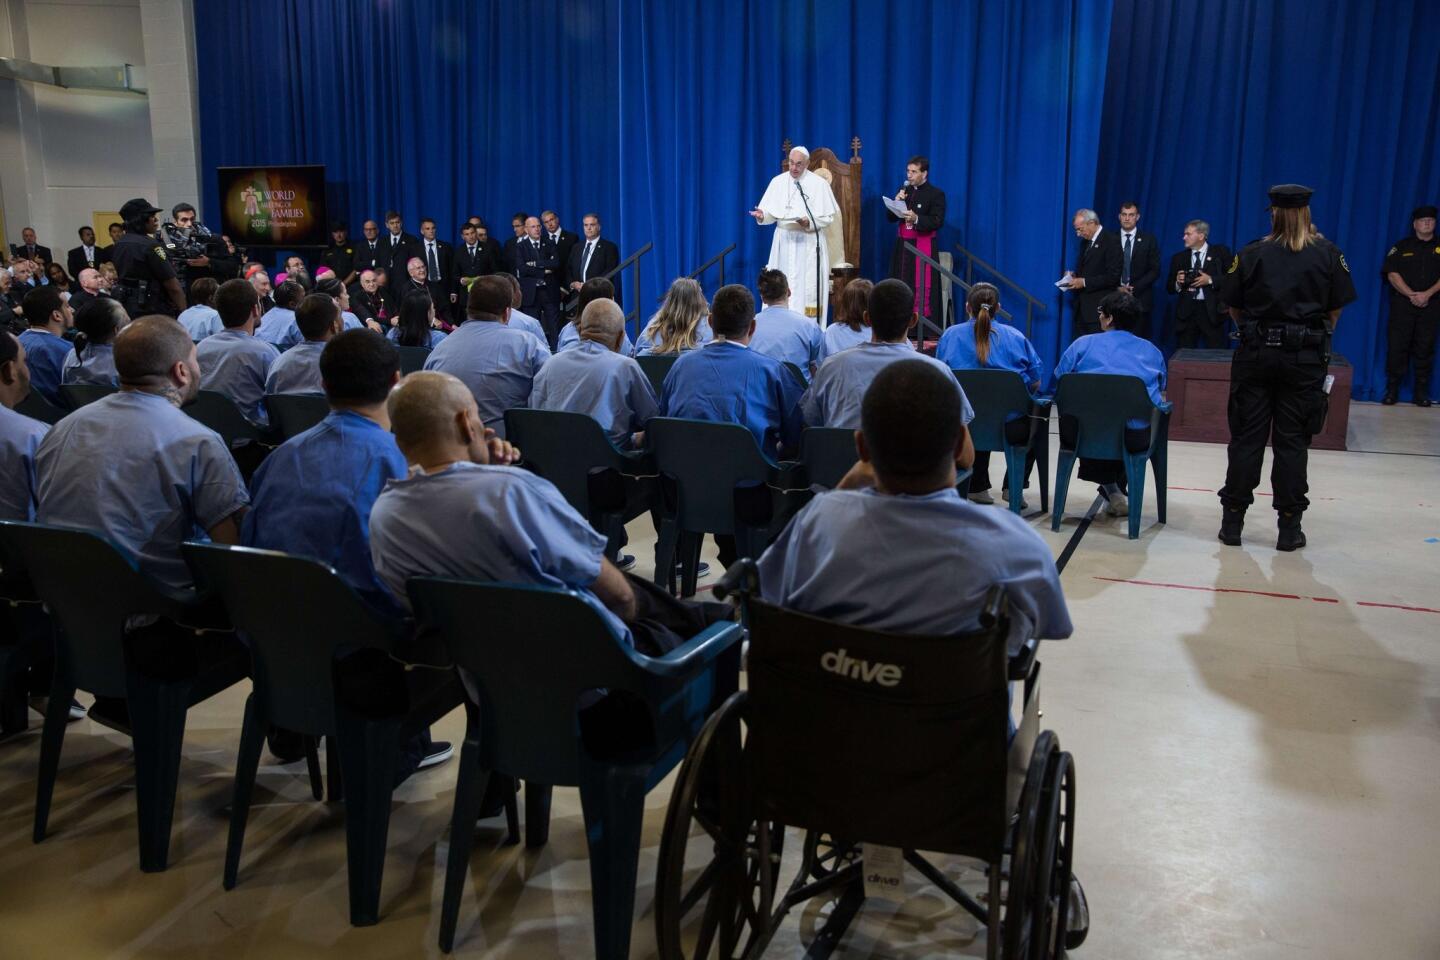 Pope Francis addresses inmates at the Curran-Fromhold Correctional Facility on Sept. 27, 2015, in Philadelphia.